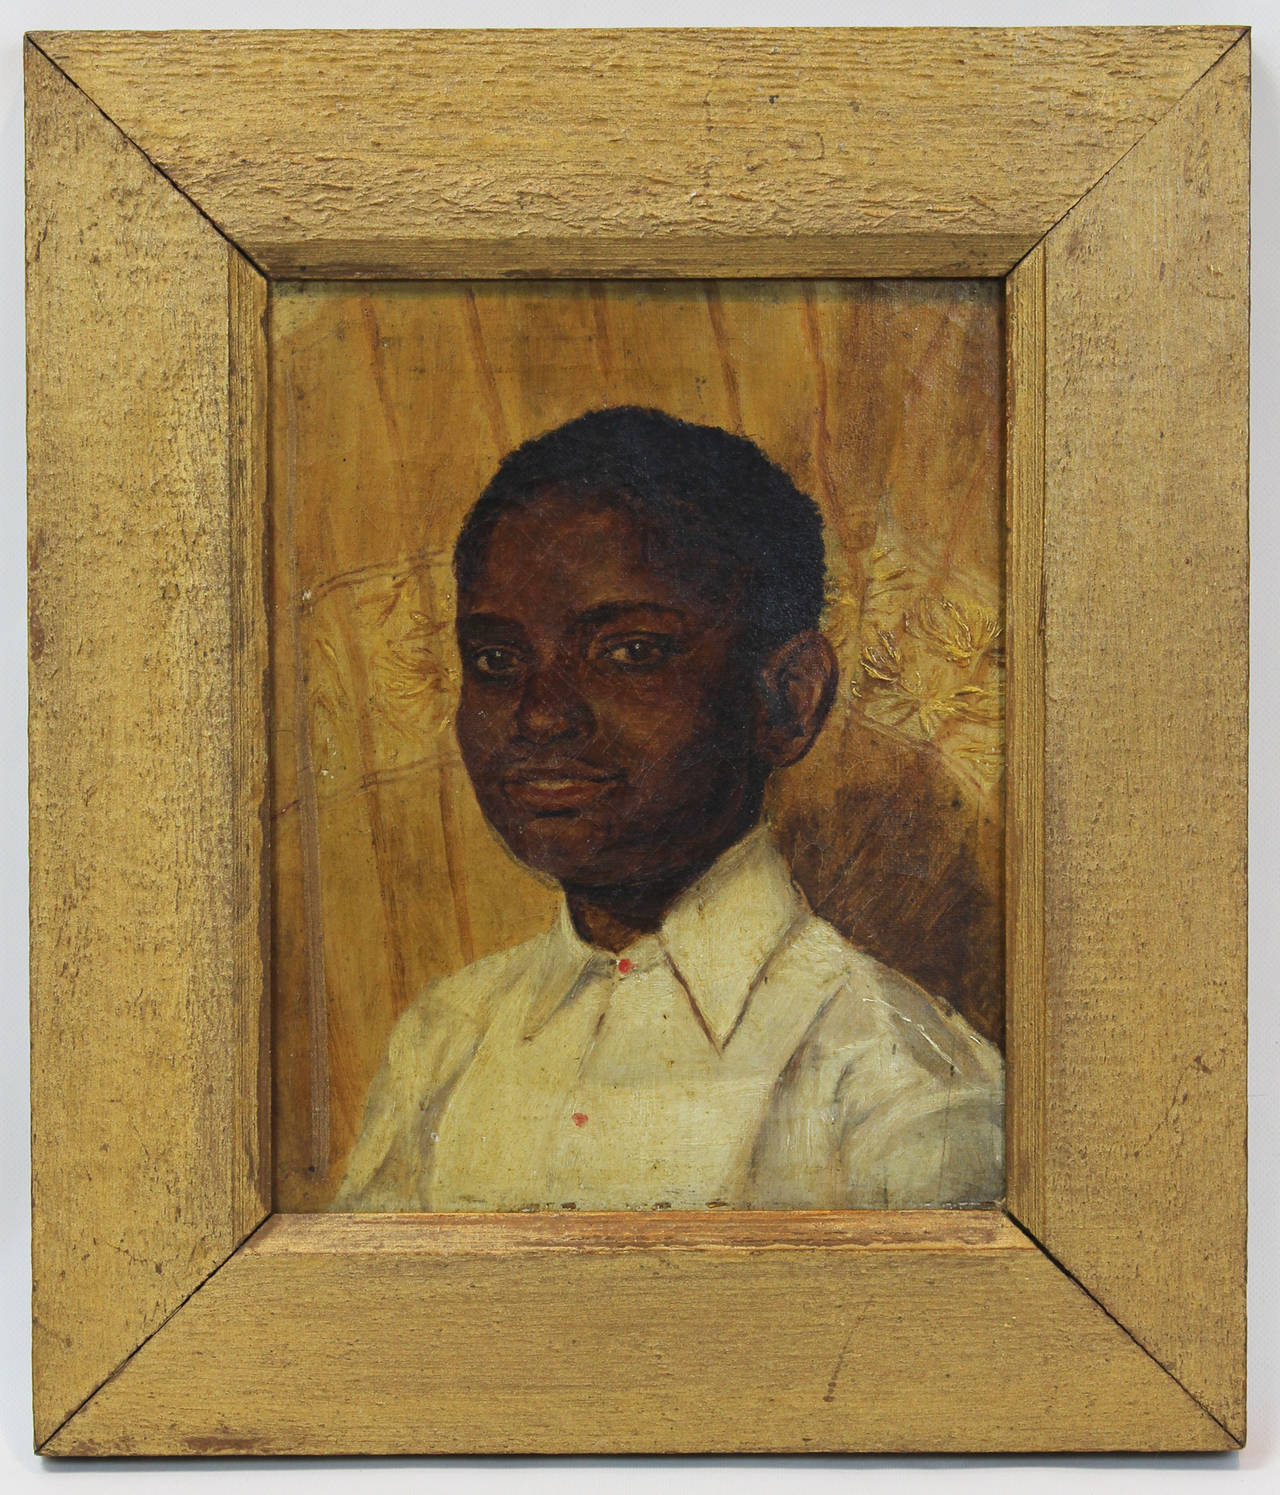 Late 19th century English oil on canvas portrait of a young black man wearing a white shirt with brilliant red buttons in it's original painted frame.